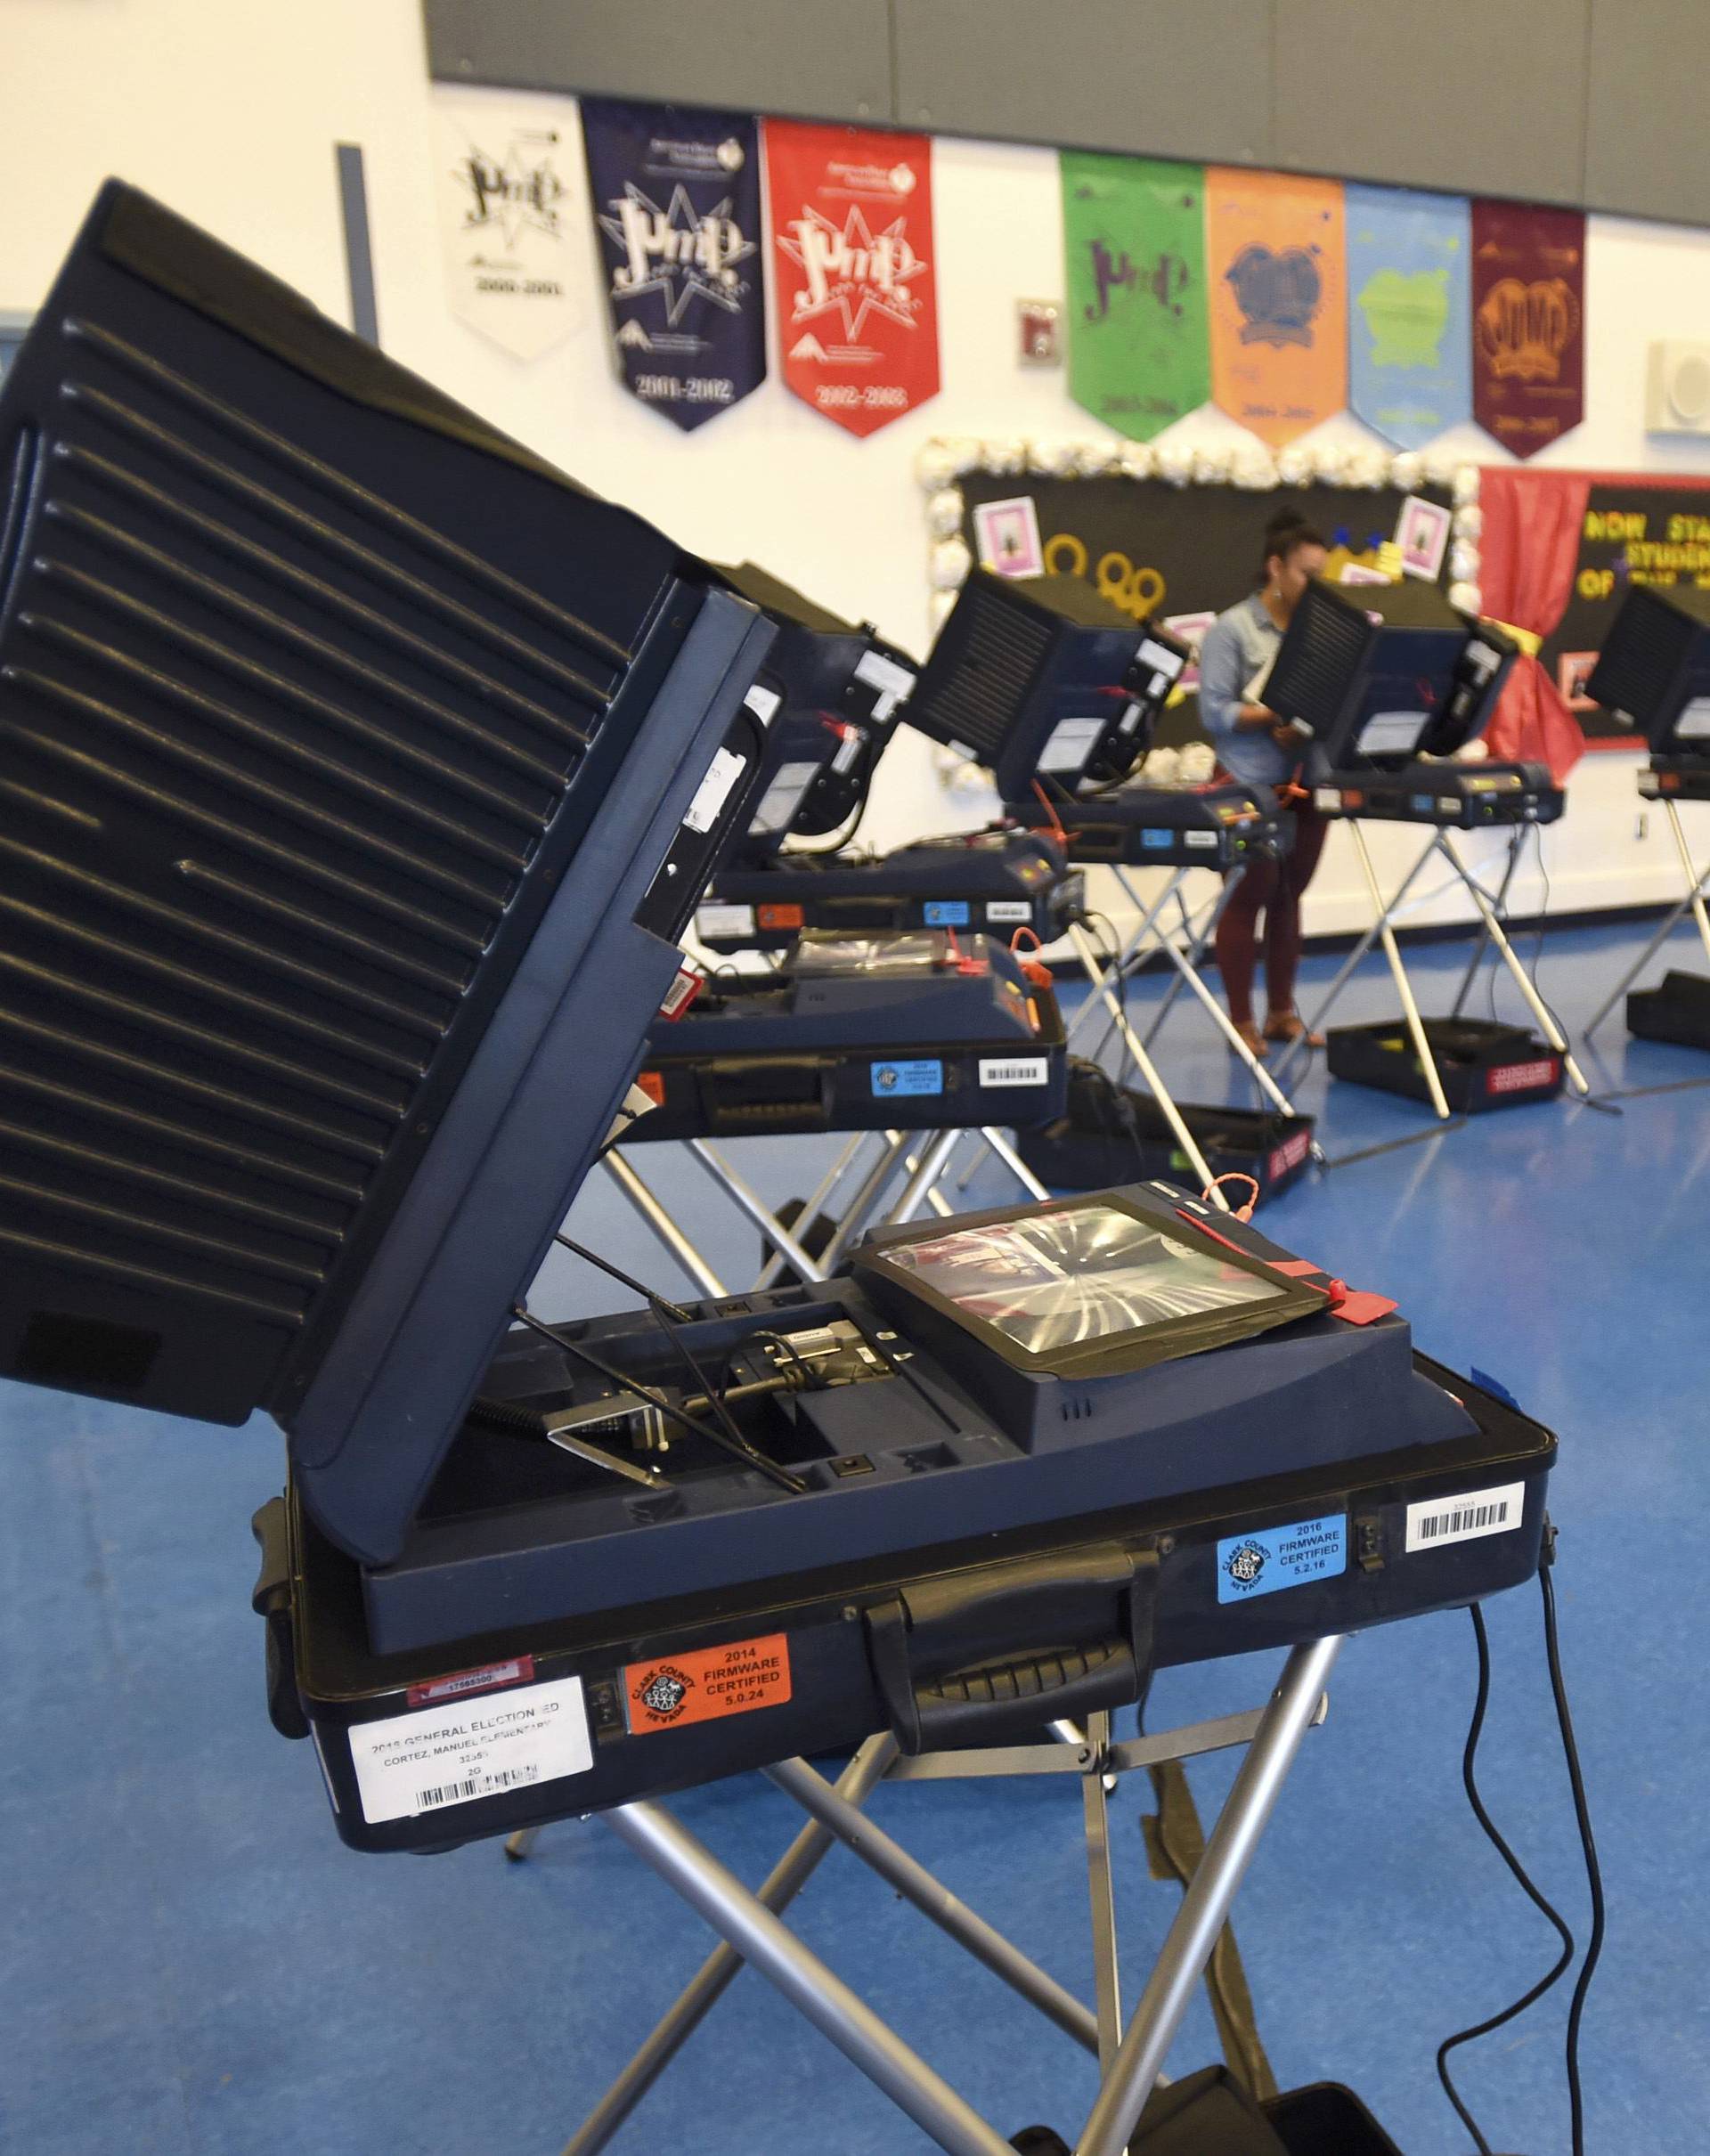 Voting machines are set up for people to cast their ballots during voting in the 2016 presidential election at Manuel J. Cortez Elementary School in Las Vegas, Nevada